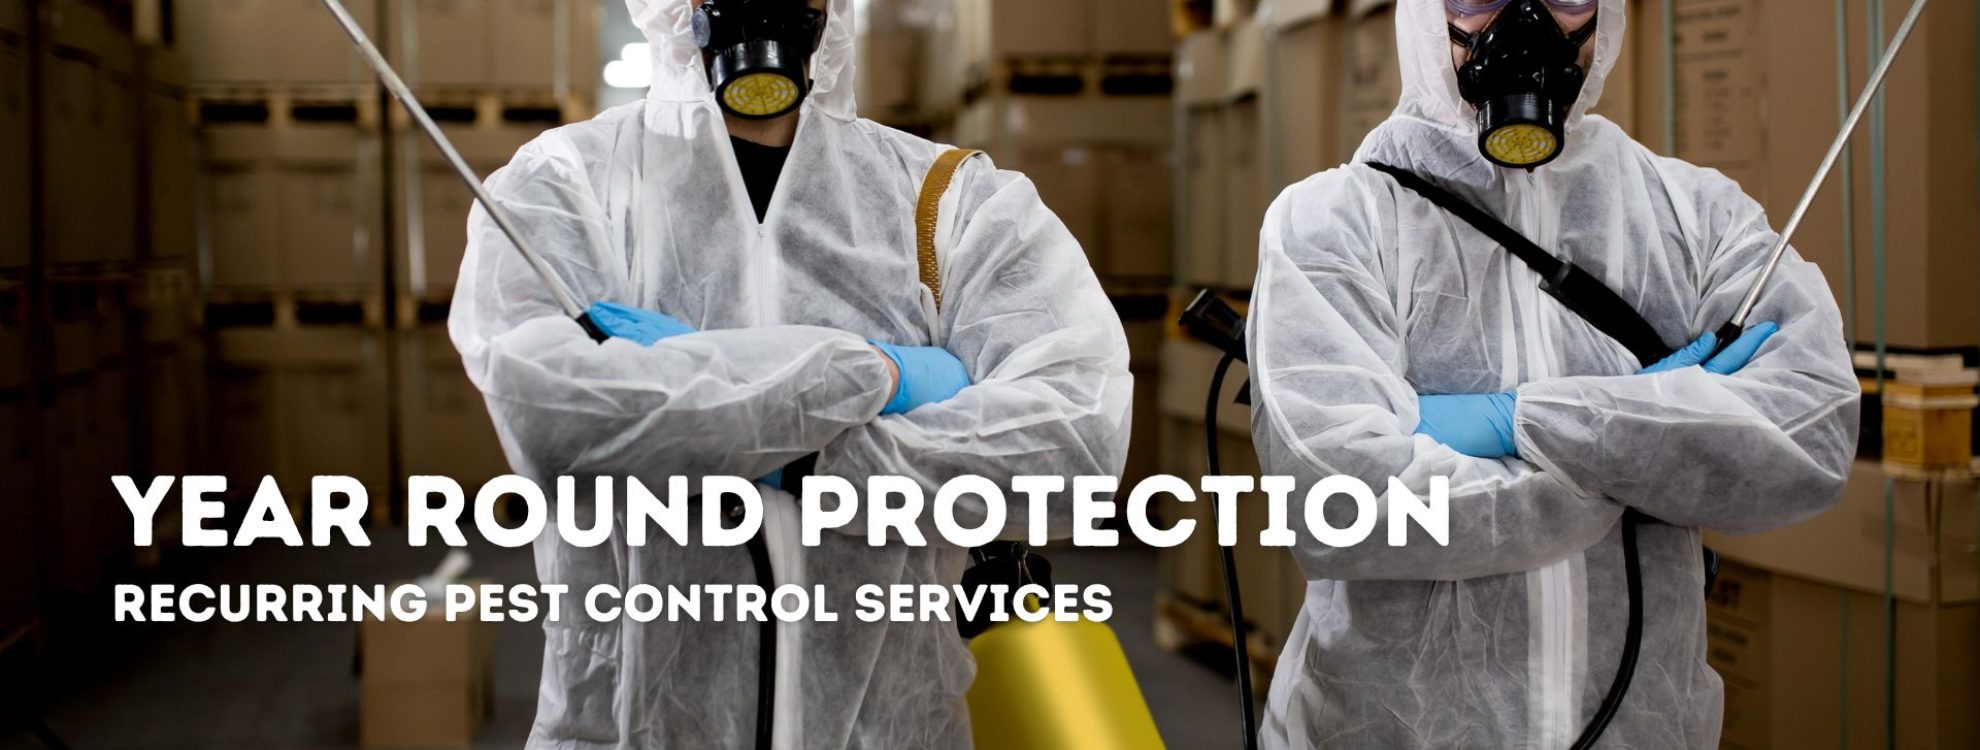 pest control professionals standing for pest control services